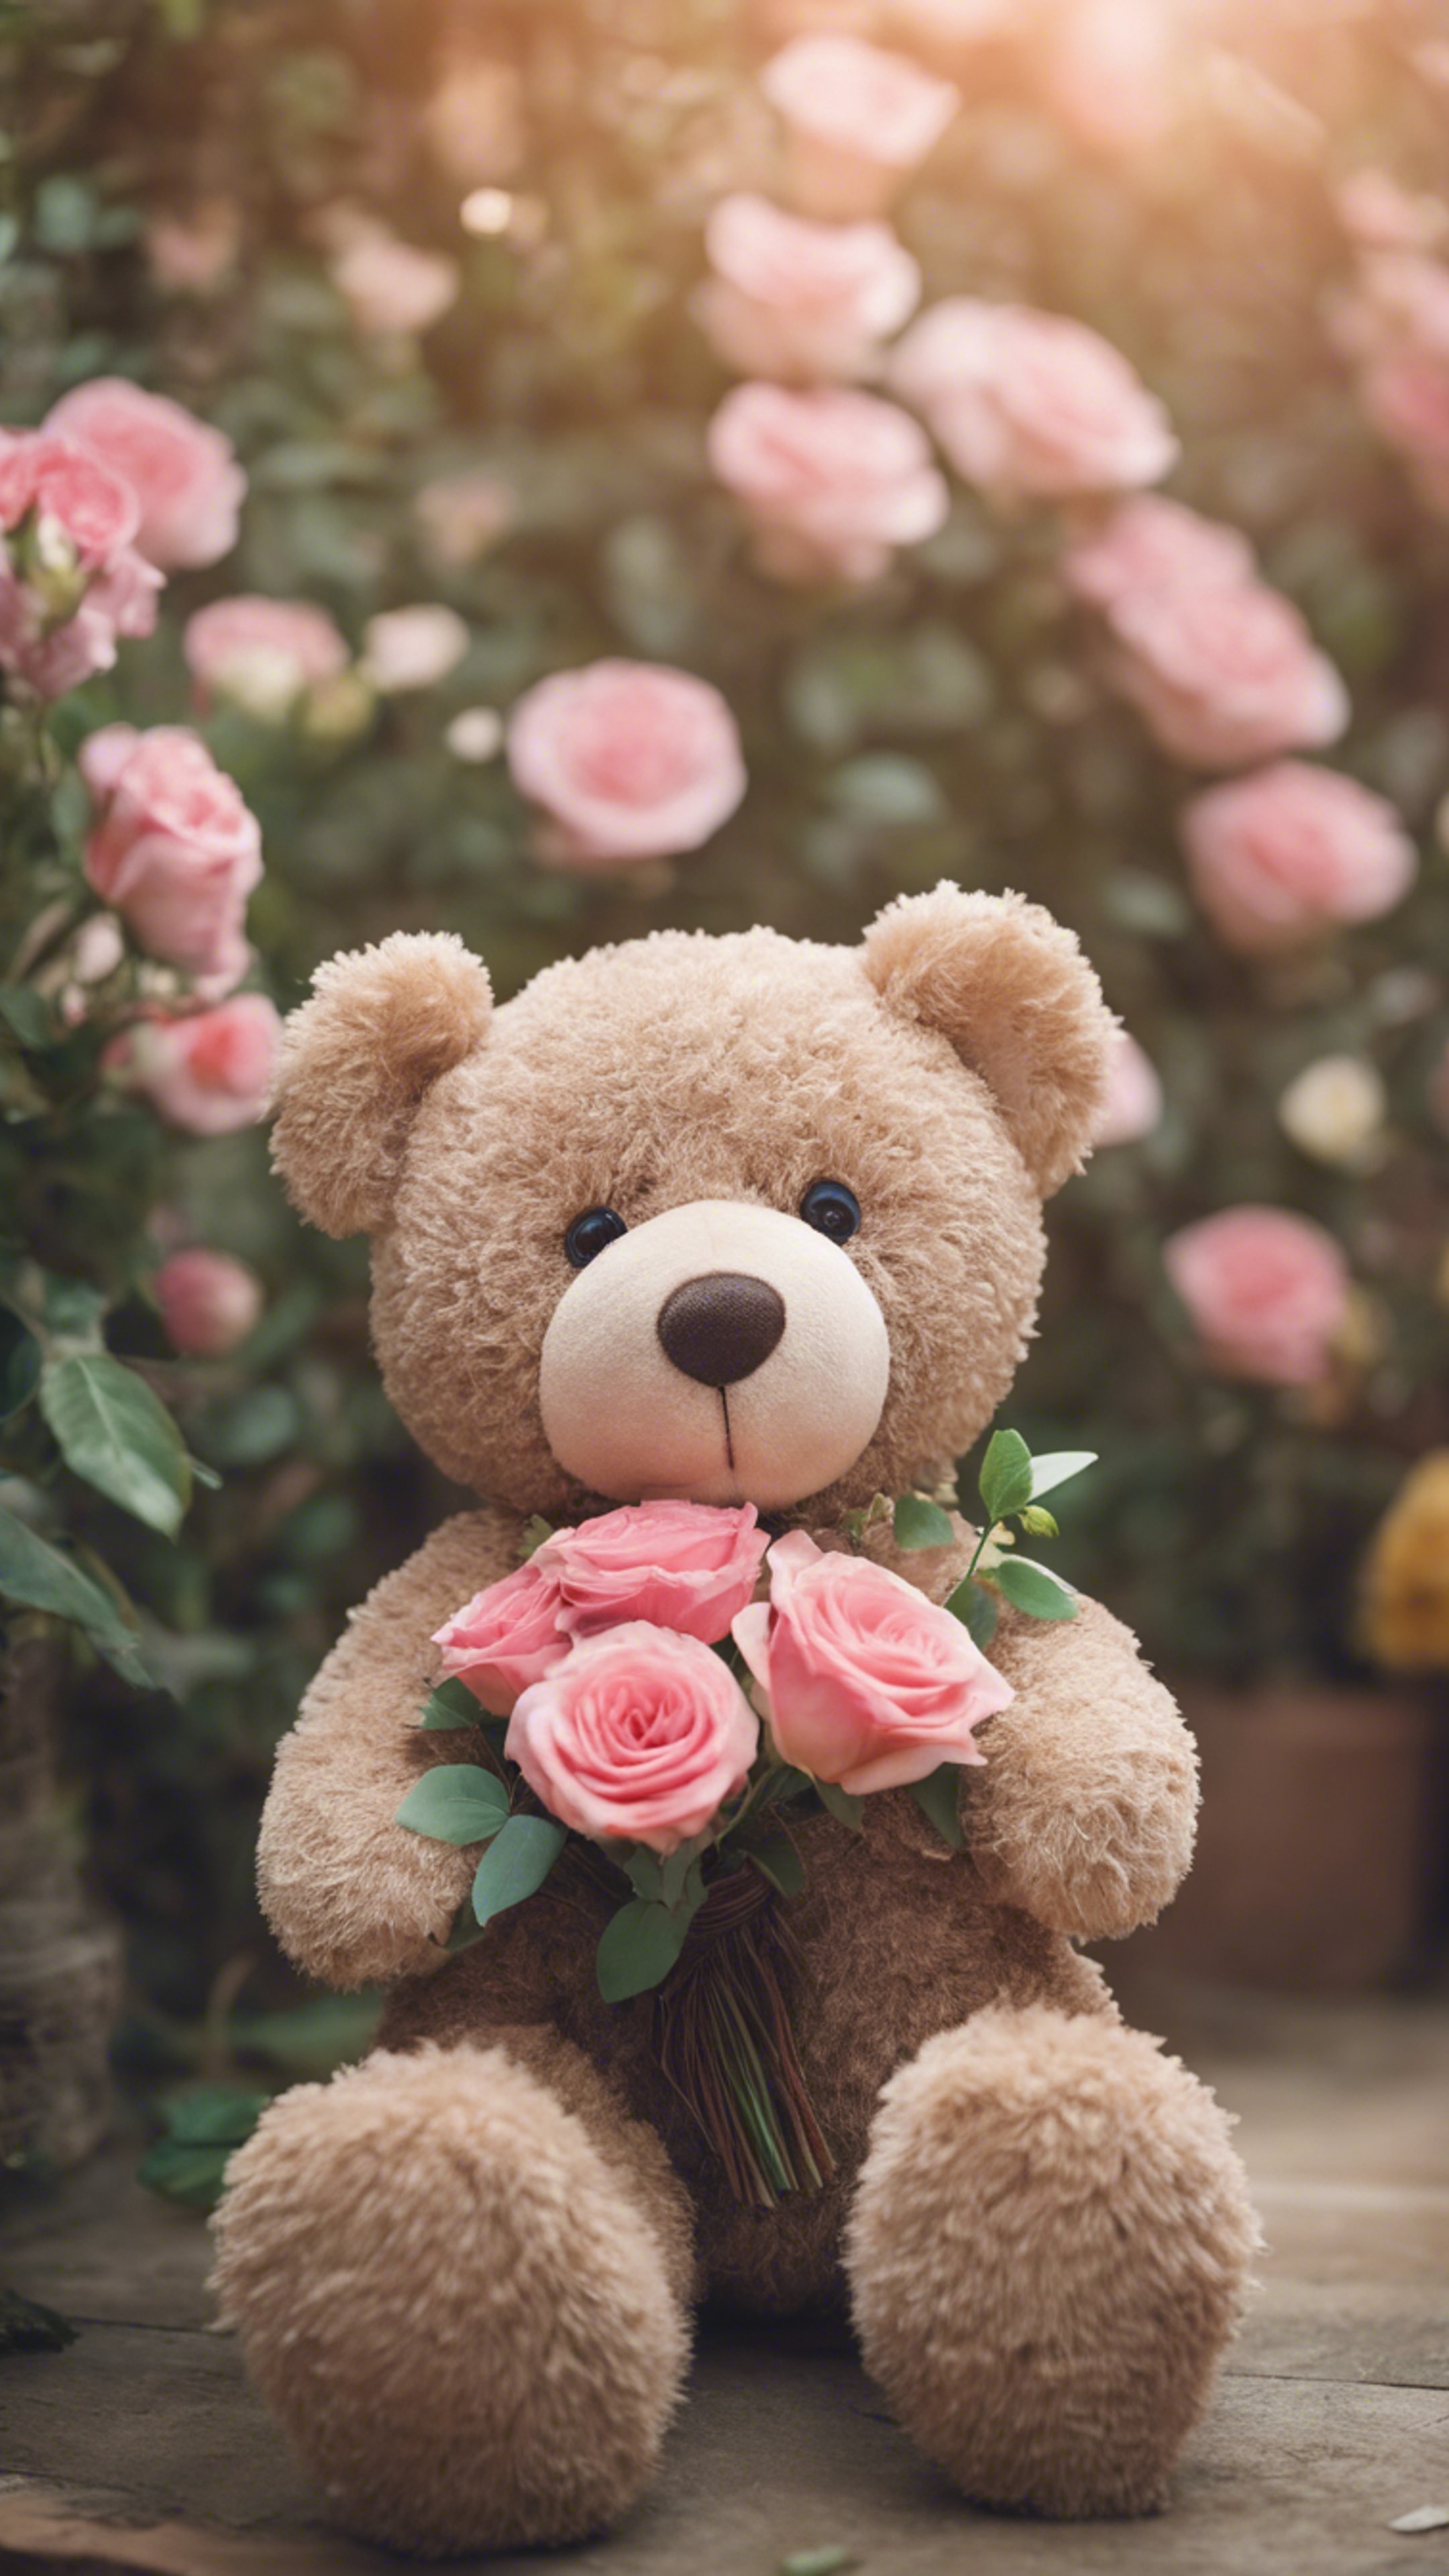 A teddy bear in a romantic setting, holding a bouquet of roses. Tapet[0c0a94ba405548b0bff3]